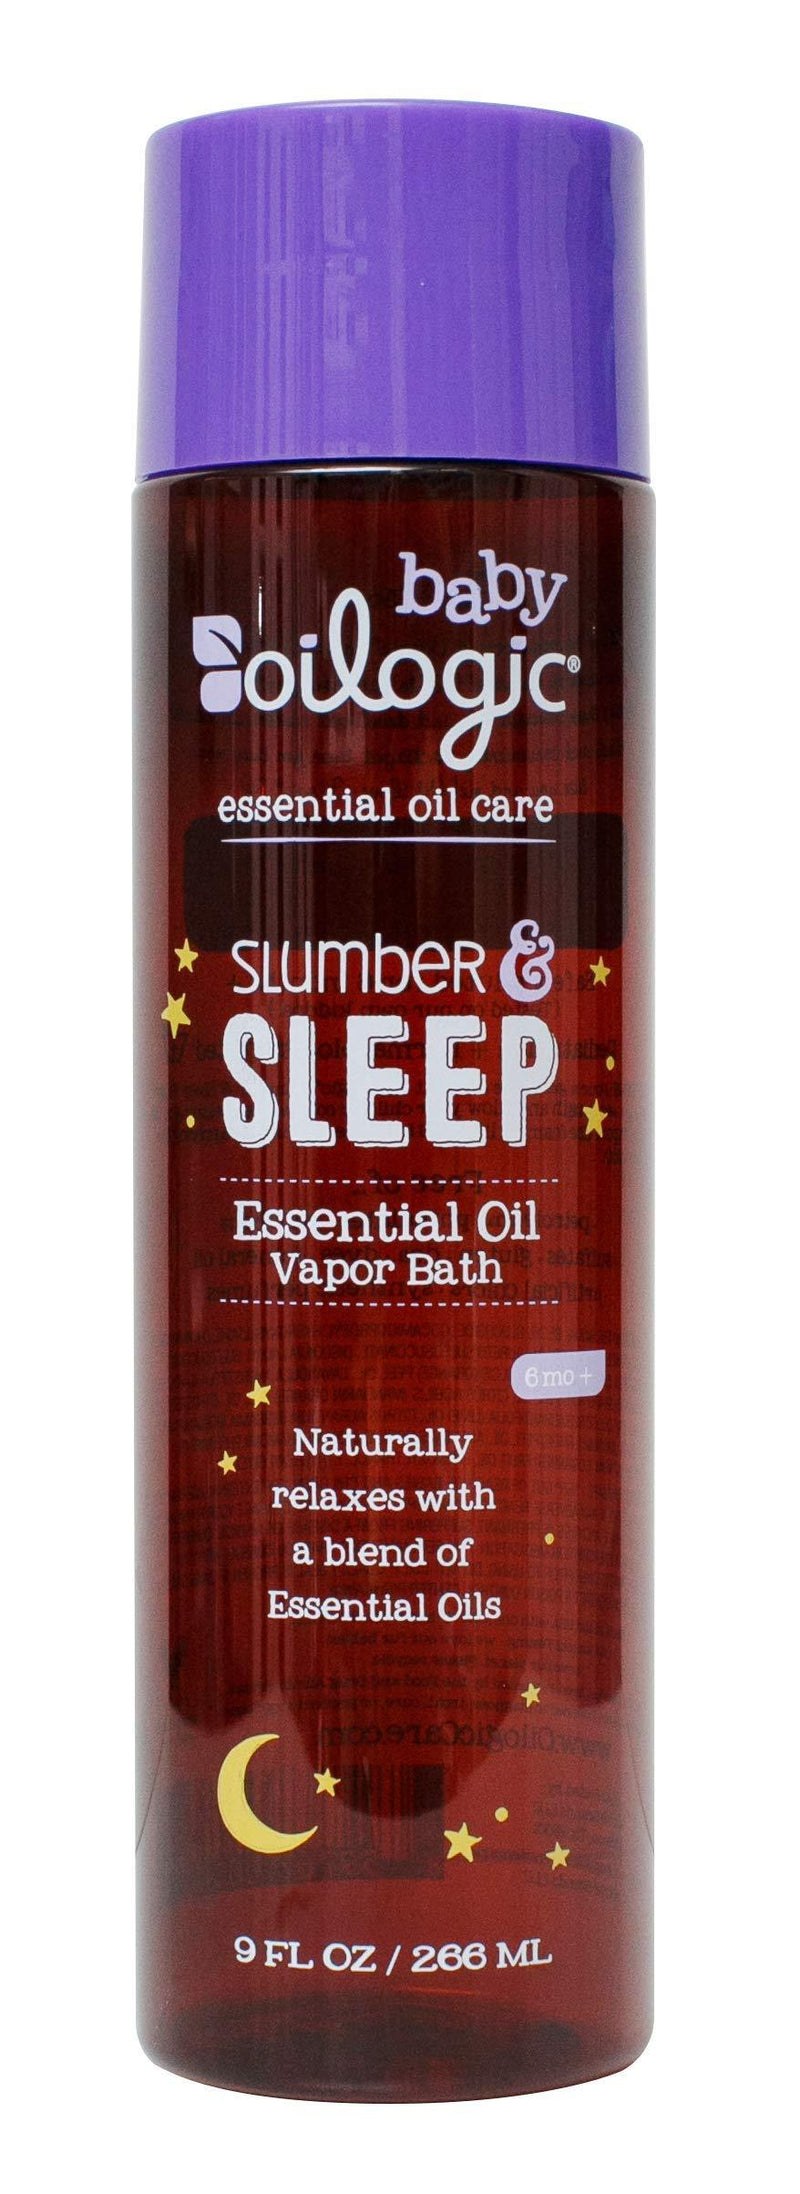 [Australia] - Oilogic Slumber and Sleep Essential Oil Vapor Bath for Babies and Toddlers - Naturally Relaxing Vapors From Essential Oils to Rest And Sleep Easy - 266ml (9 fl oz) 